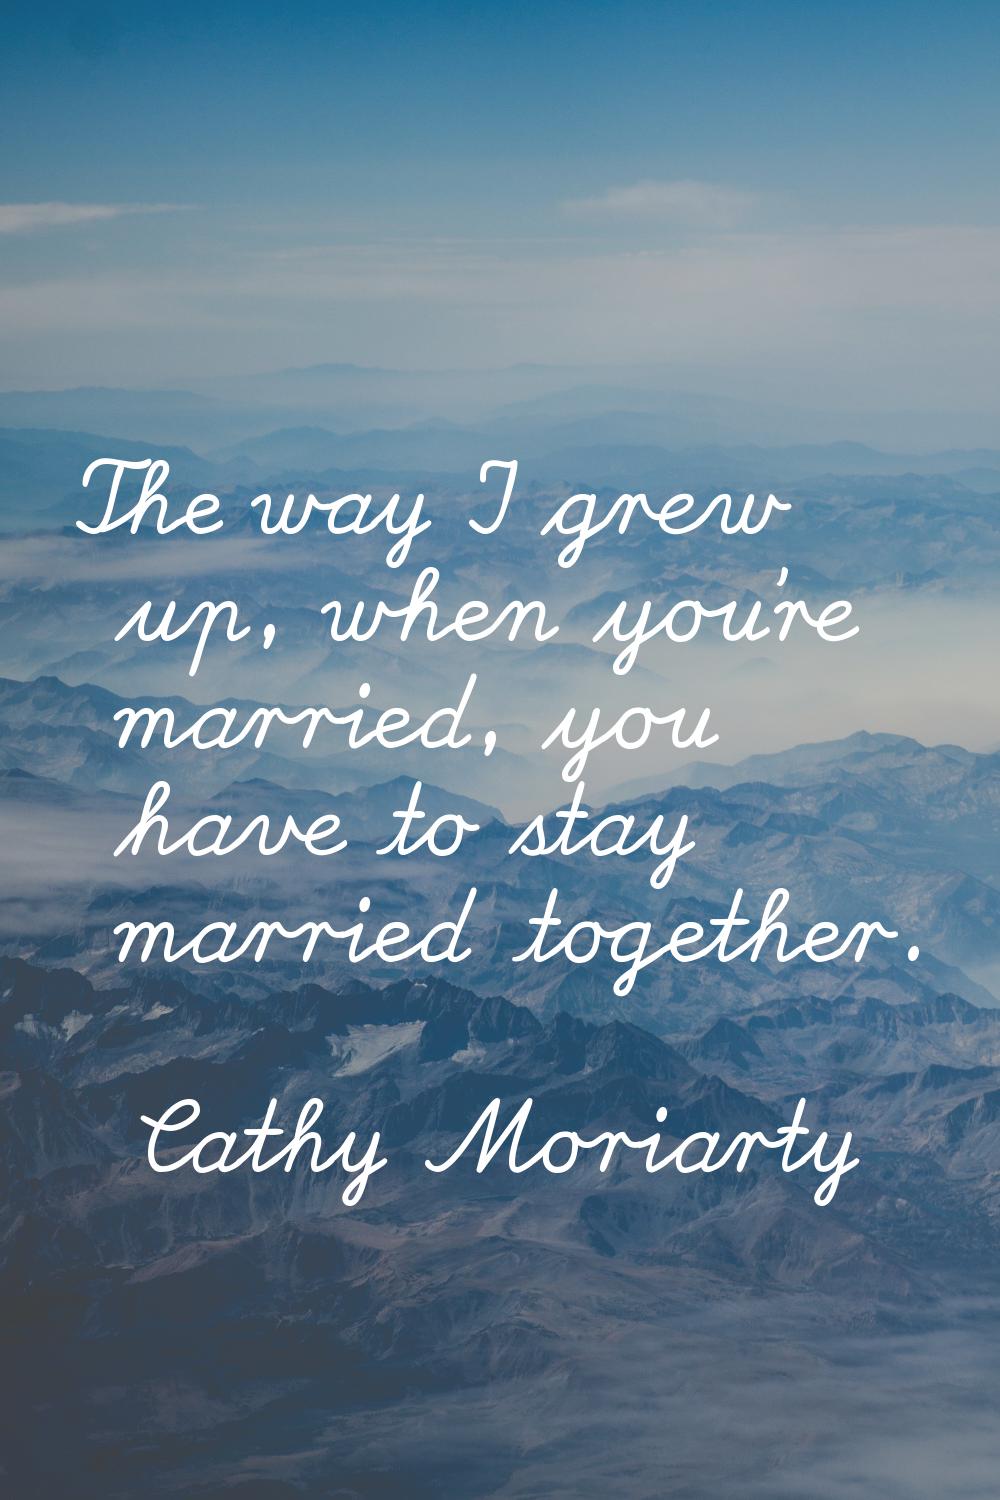 The way I grew up, when you're married, you have to stay married together.